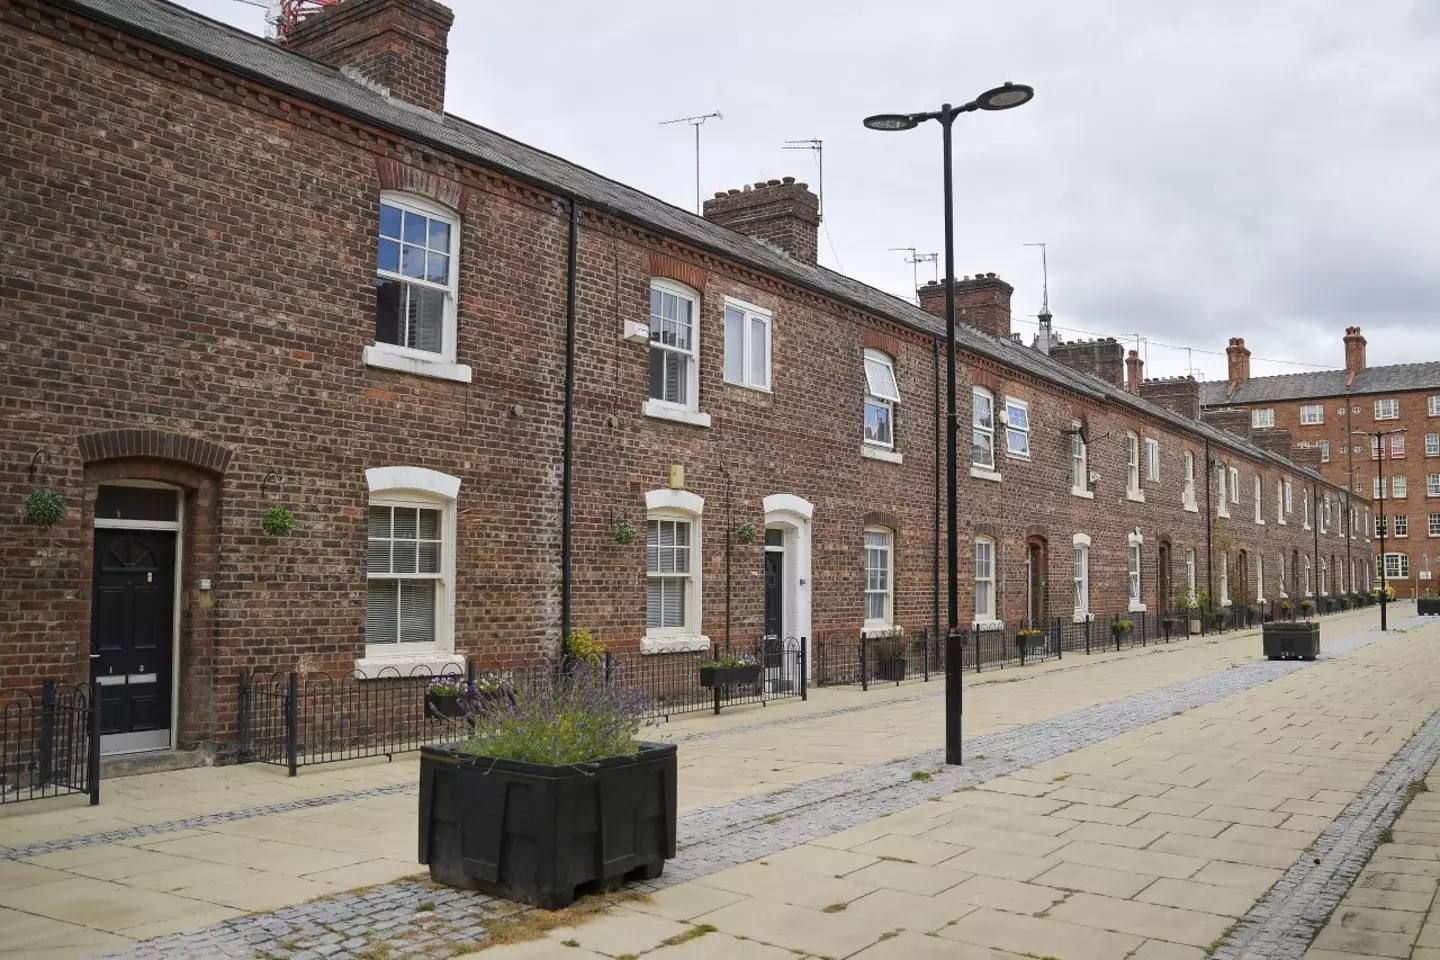 Residents living on two of Manchester's prettiest streets have revealed living there is frustrating at times.